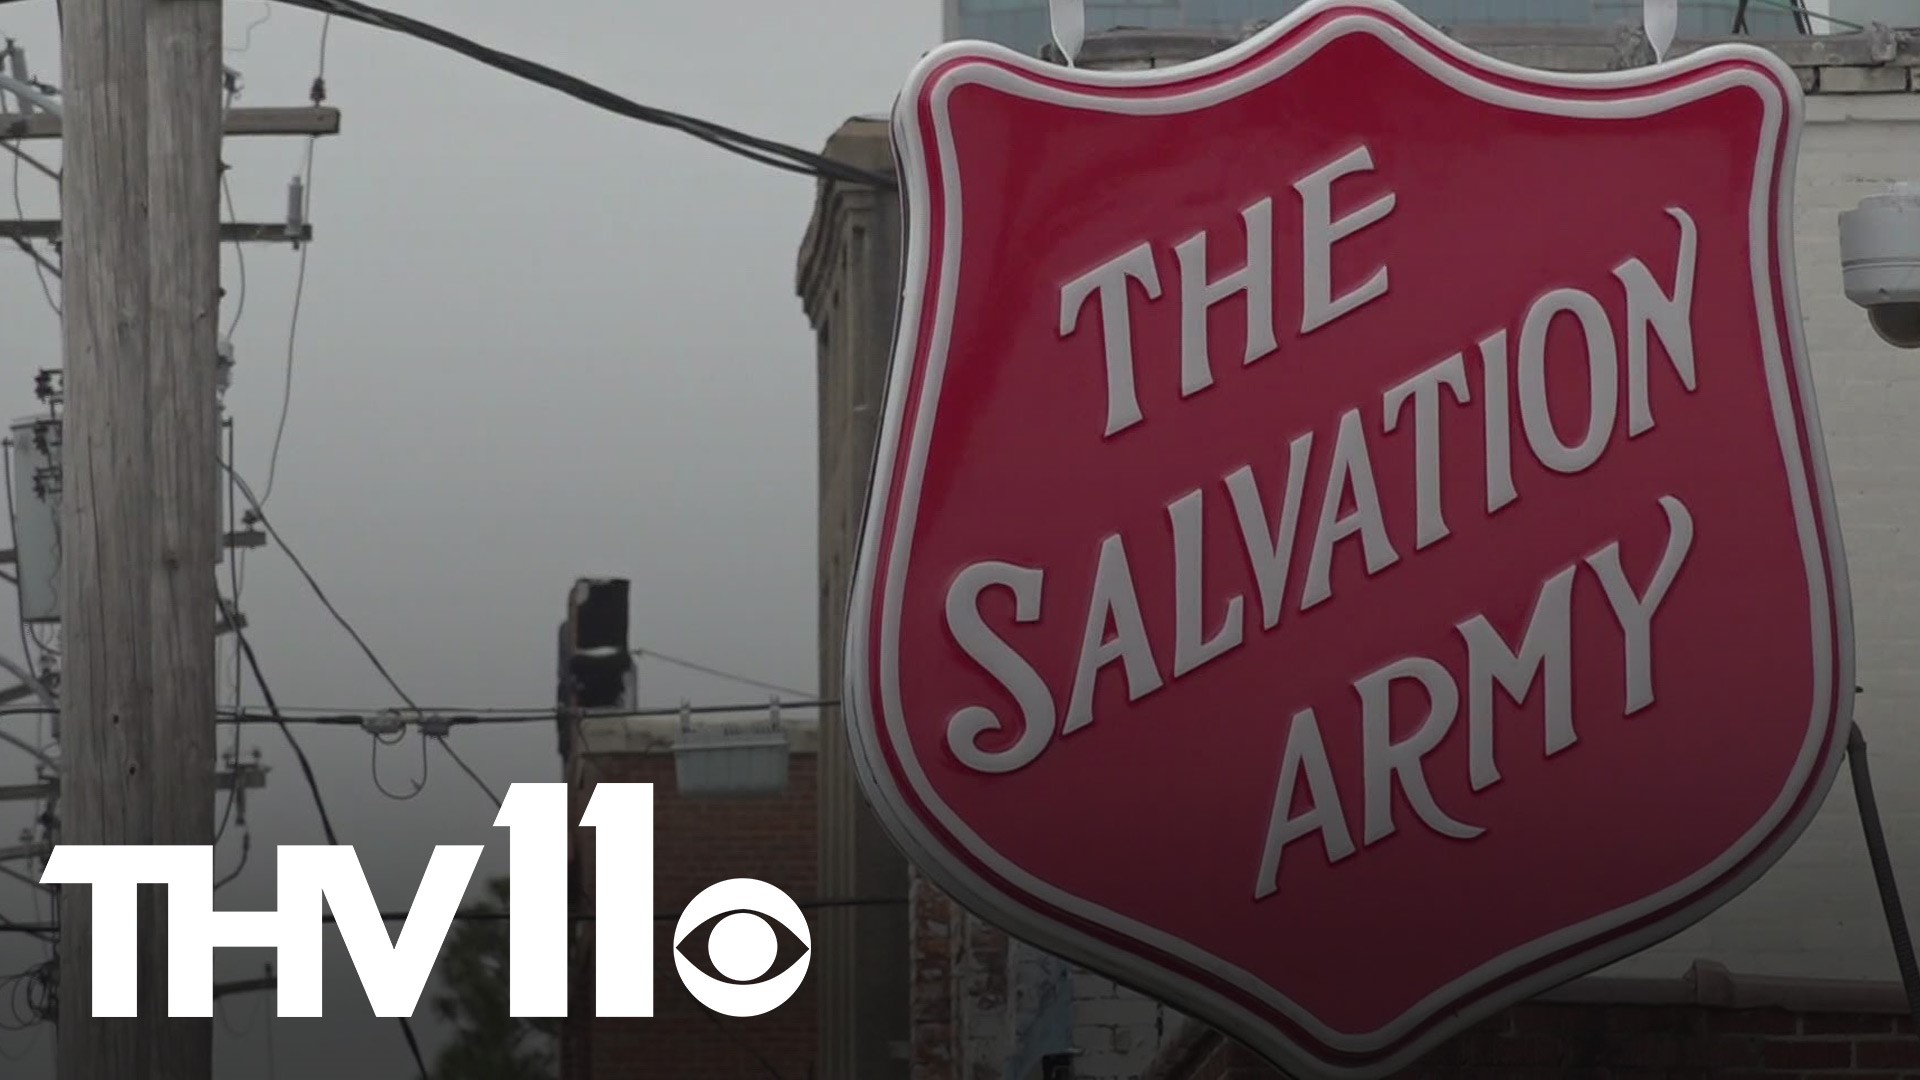 The Little Rock Salvation Army is one step closer to reopening after a fire at the building back in March.